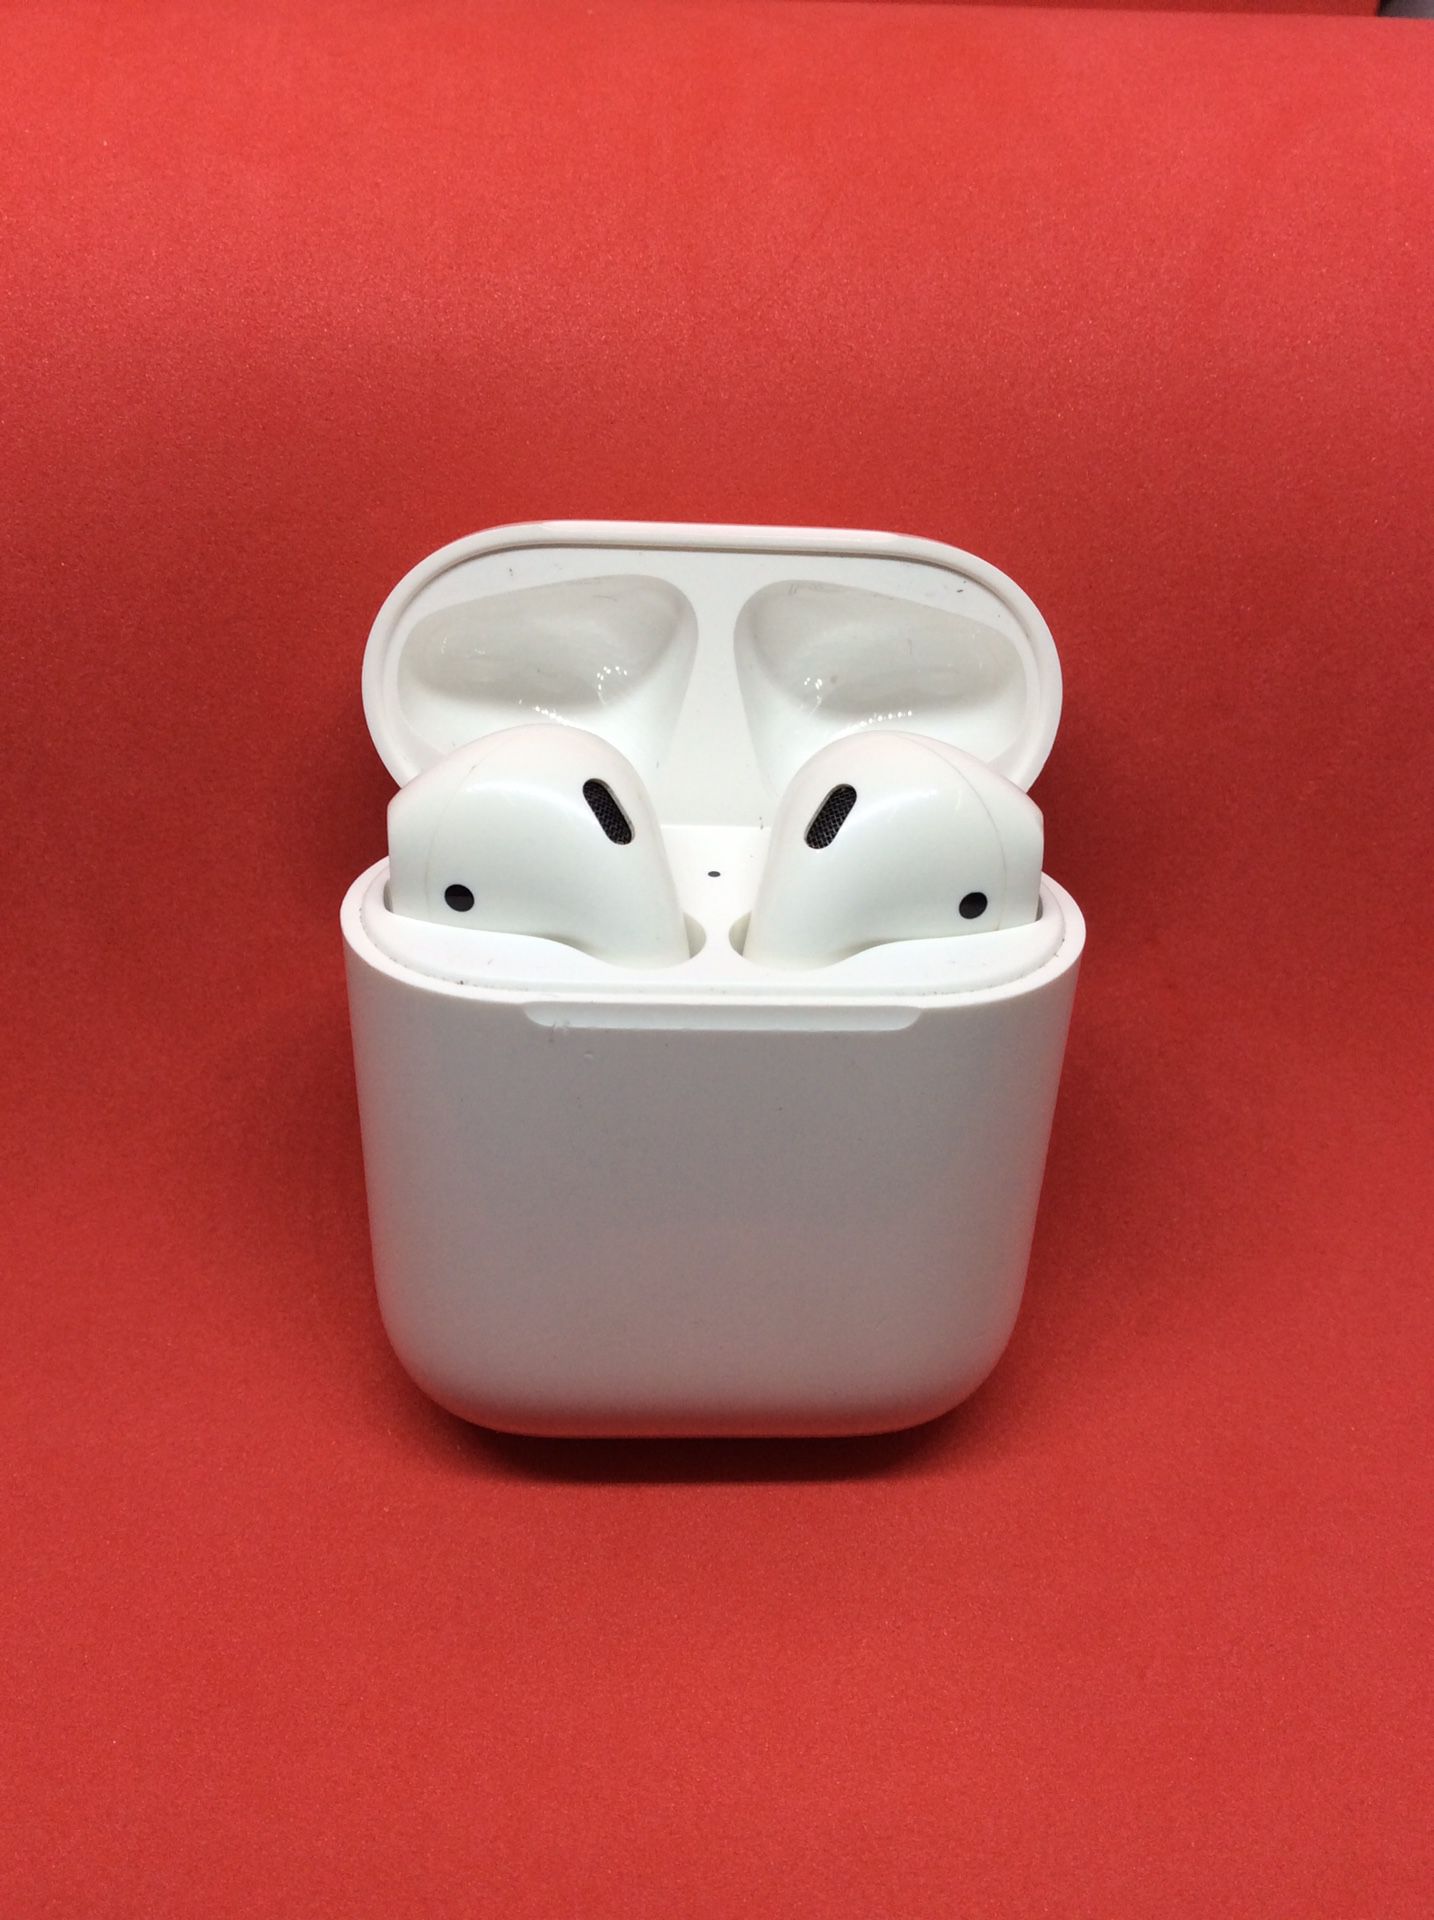 Apple AirPods 2nd Generation Wireless A1602 Headphones